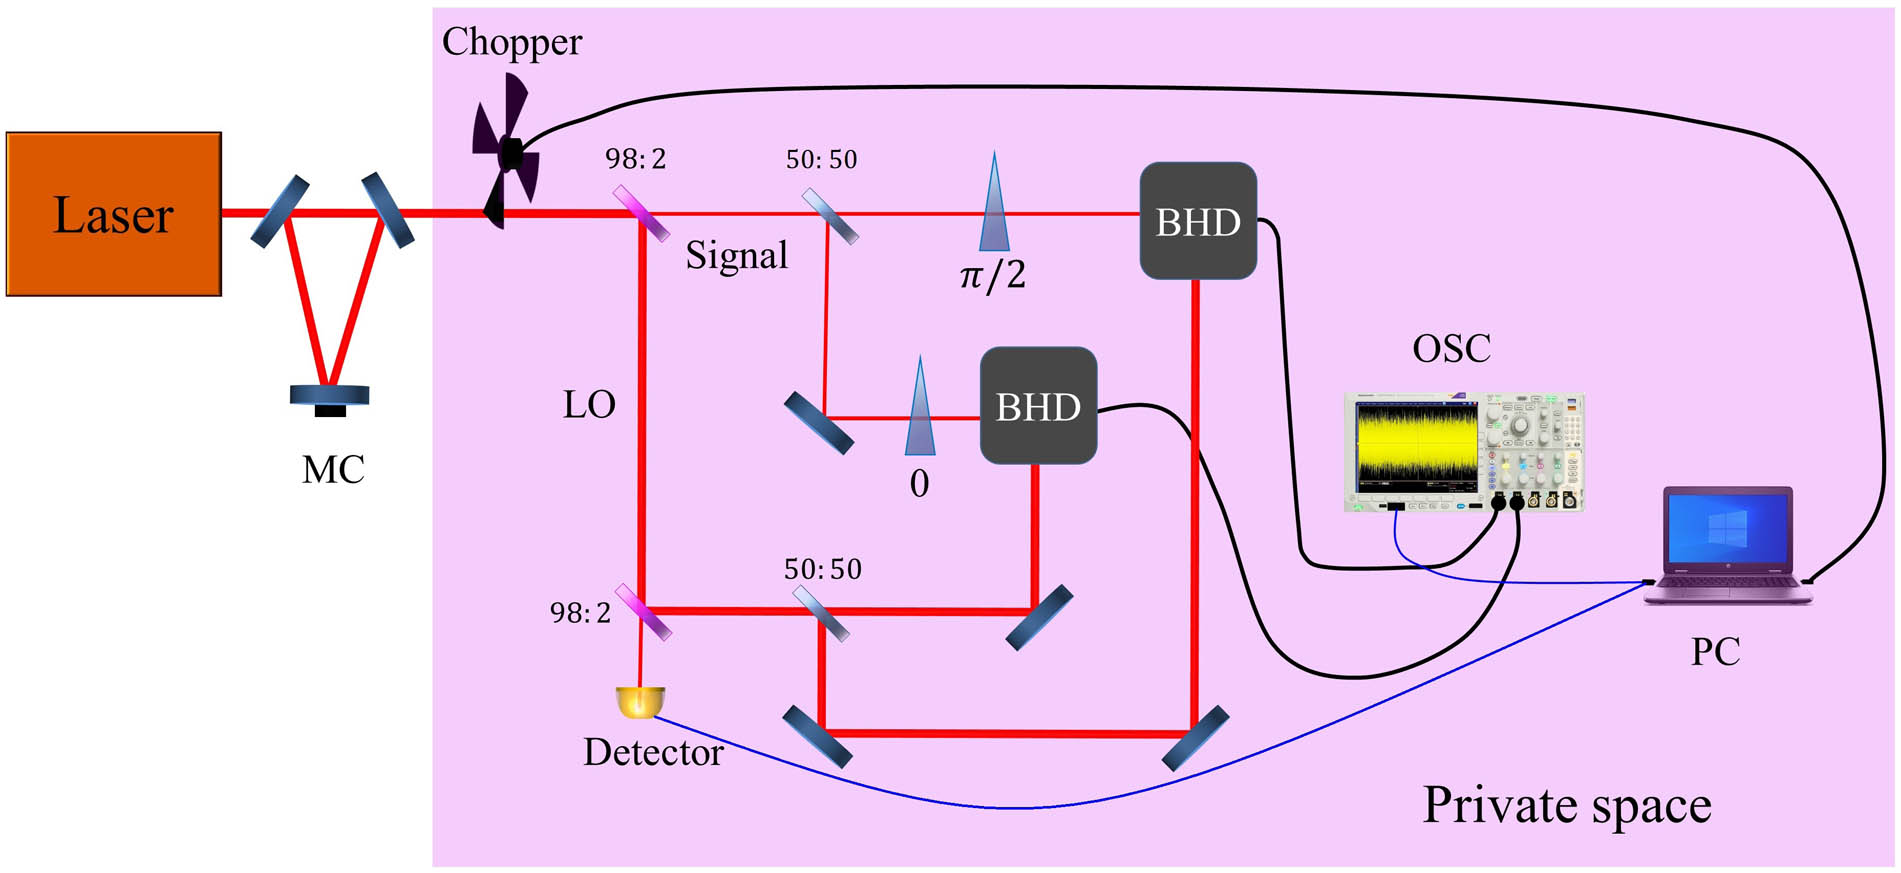 Experimental schematic configuration for mutually testing SDI QRNG. The pink area is a private space that no eavesdropper has access to. The black and blue curves represent the electric and data cables, respectively. The coherent state is generated via a laser and MC. The laser beam is divided into the signal beam and LO via a 98:2 BS. Both the signal beam and the LO are split in half via two 50:50 BSs. Two BHDs are used to measure the quadrature P^ and Q^ of the two coherent states with the phase differences (0 and π/2) between the signal beam and LO, respectively. All data are recorded by an OSC, and the post-processing is achieved via a PC. Laser, Nd:YVO4; MC, mode-cleaner; 98:2, 98:2 beam splitter; 50:50, 50:50 beam splitter; LO, local oscillator; BHD, balanced homodyne detector; HR, mirror with high reflectivity; OSC, oscilloscope; PC, personal computer.